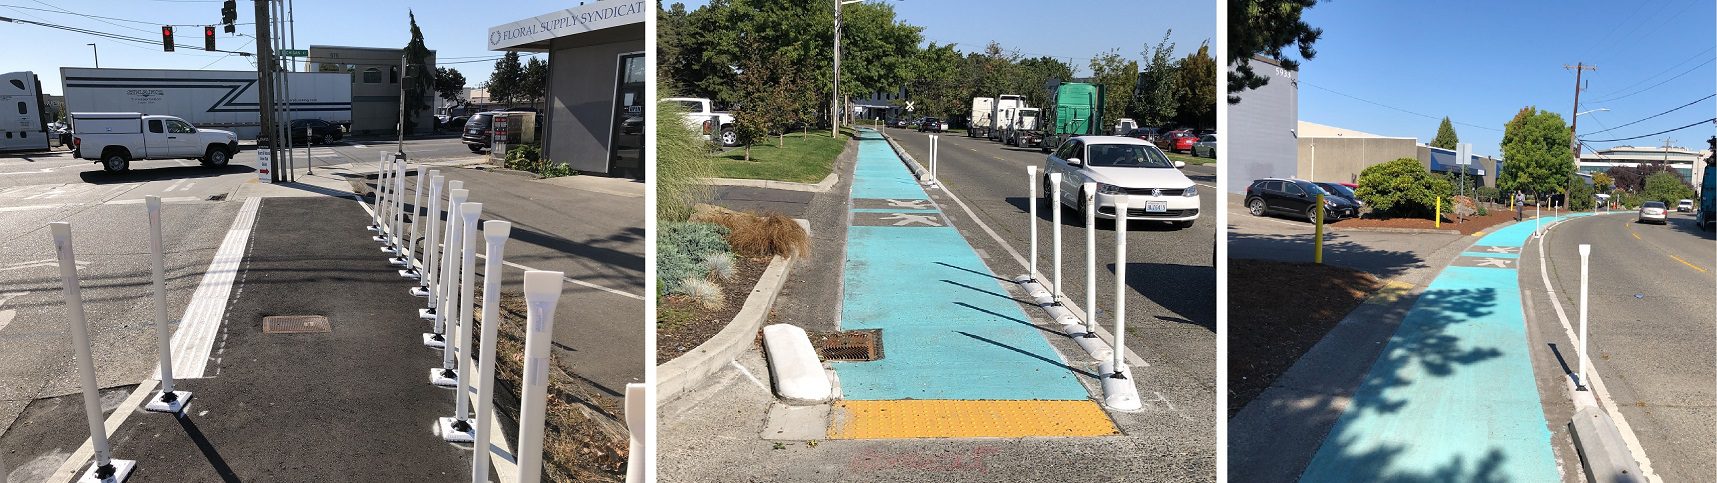 New 6th Ave S walkway. The walkway is shown in three photos. The walkway is painted light green-blue in the middle and right photos, and it is black in the left photo. White painted posts are visible in each photo, as well as parked and moving vehicles.